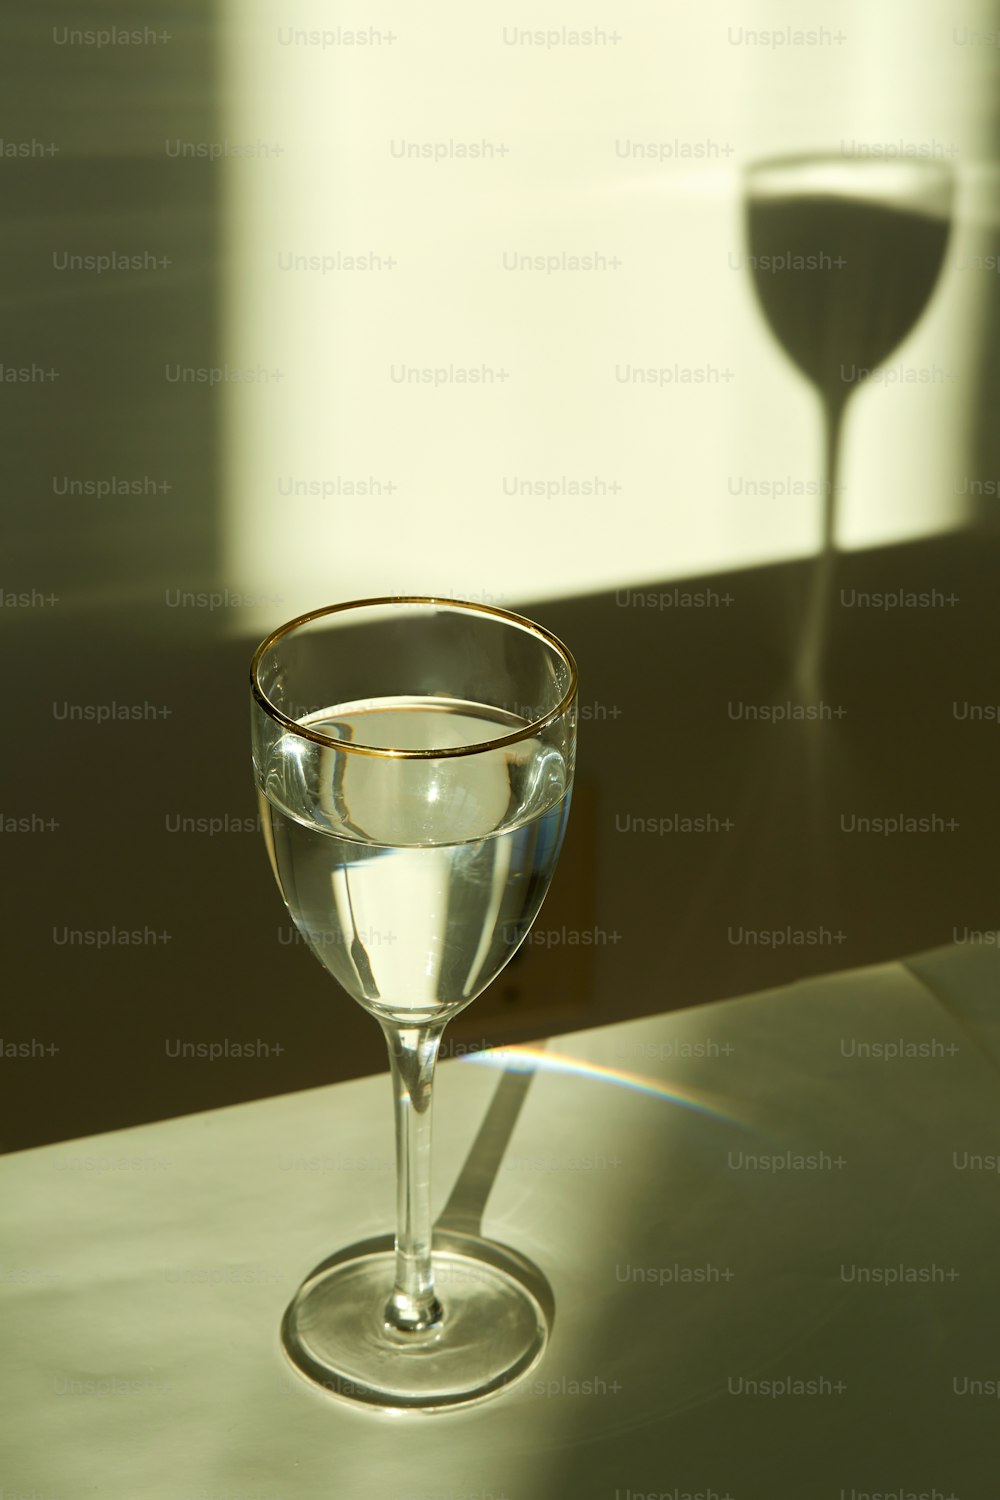 a glass of wine